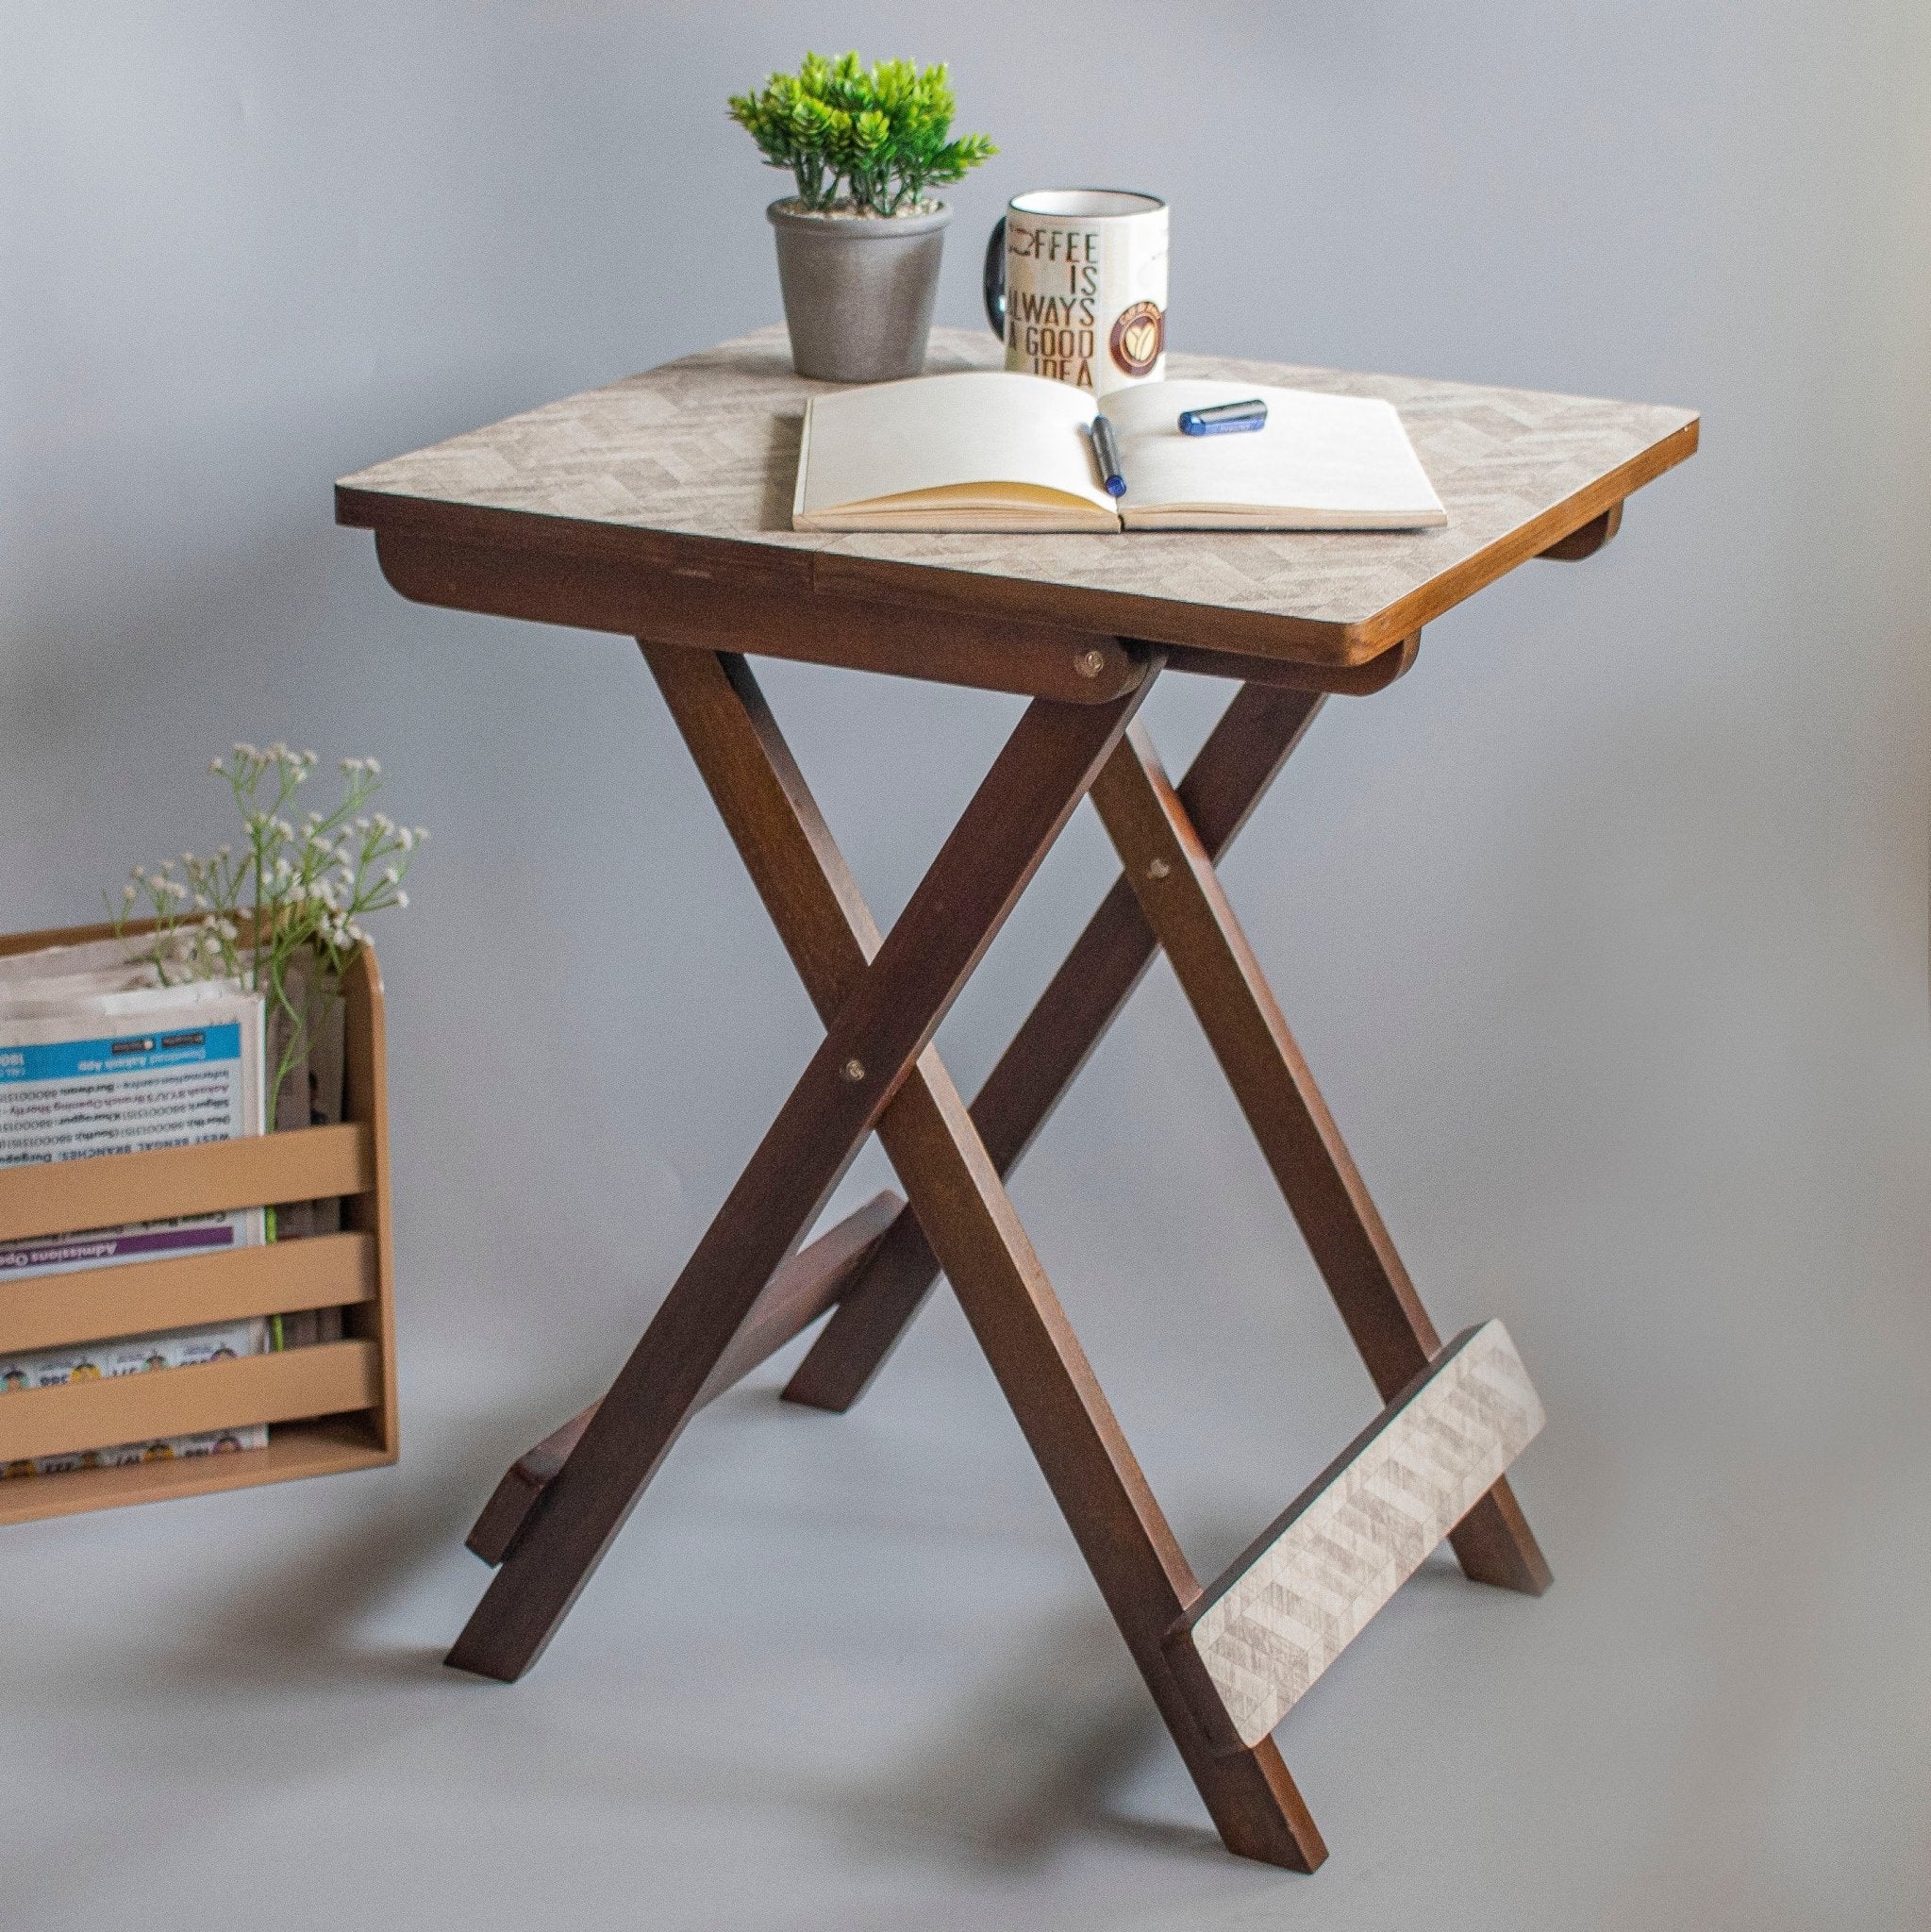 Benefits of a Folding Table : Space-Saving for Your Home or Office